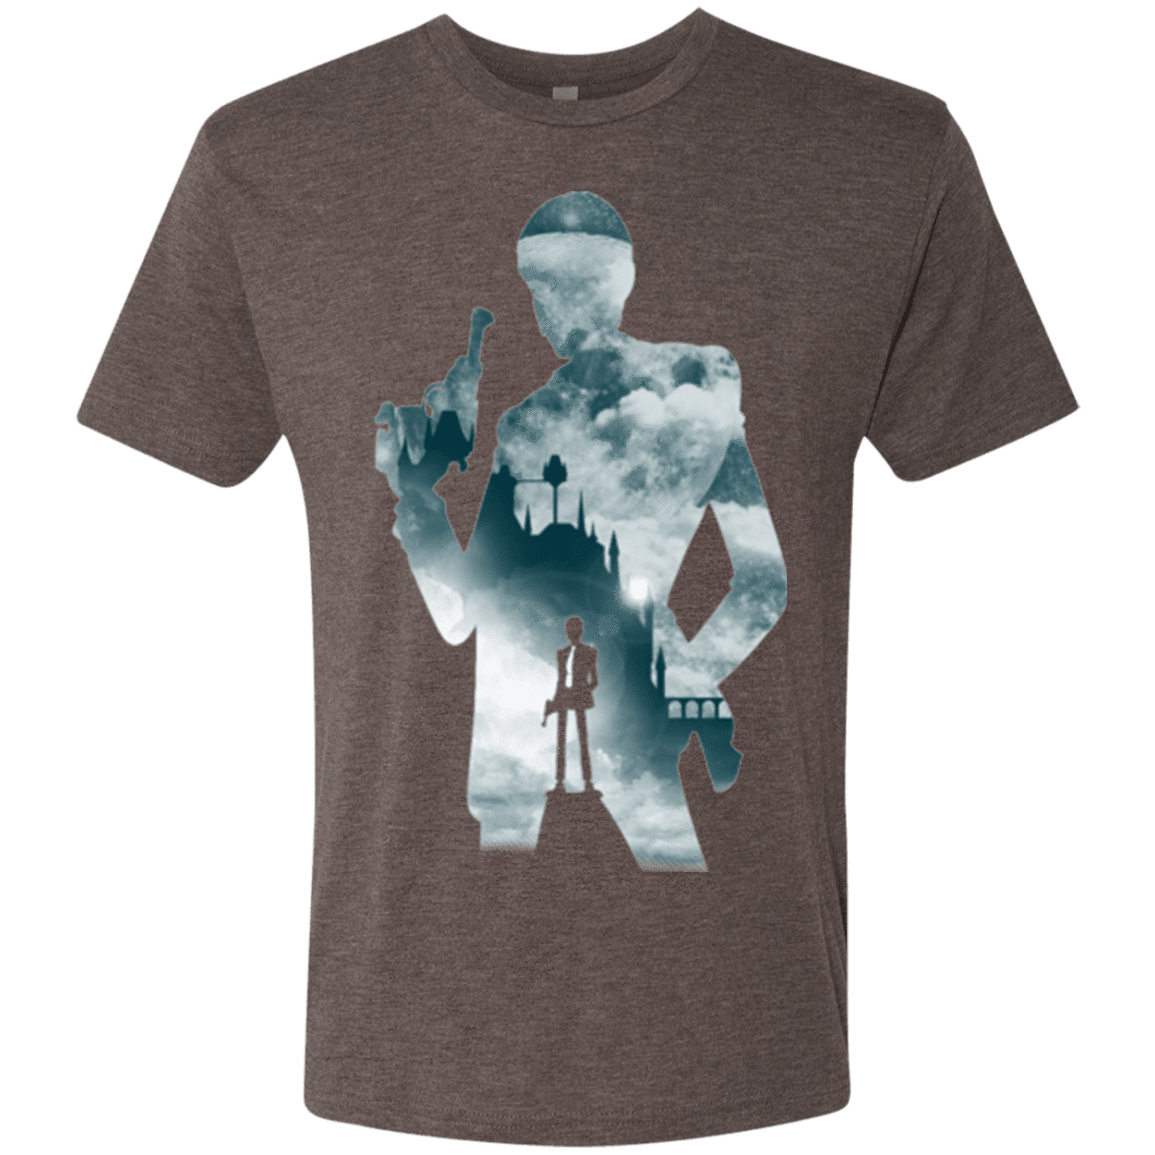 T-Shirts Macchiato / Small The Thief and the Castle Men's Triblend T-Shirt